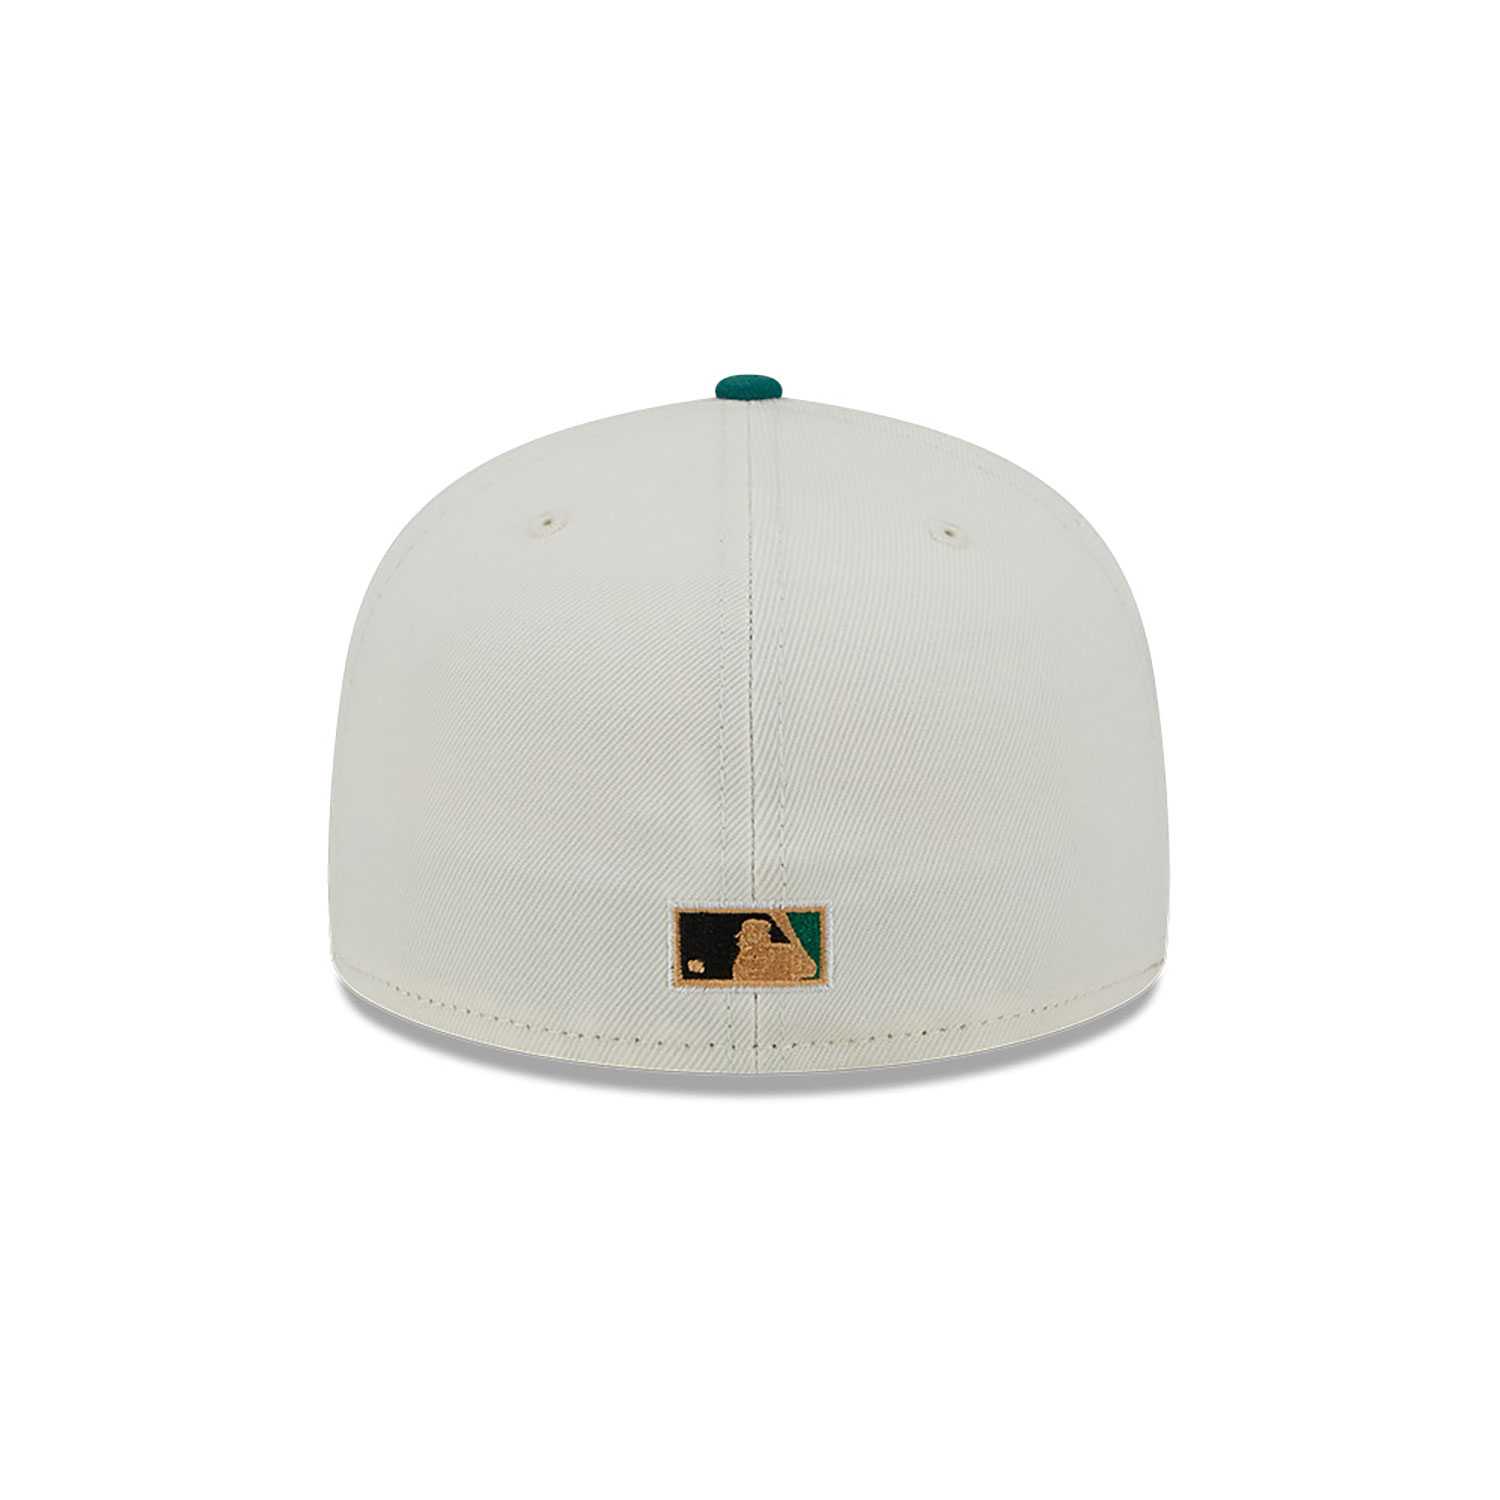 Detroit Tigers Camp Off White 59FIFTY Fitted Cap